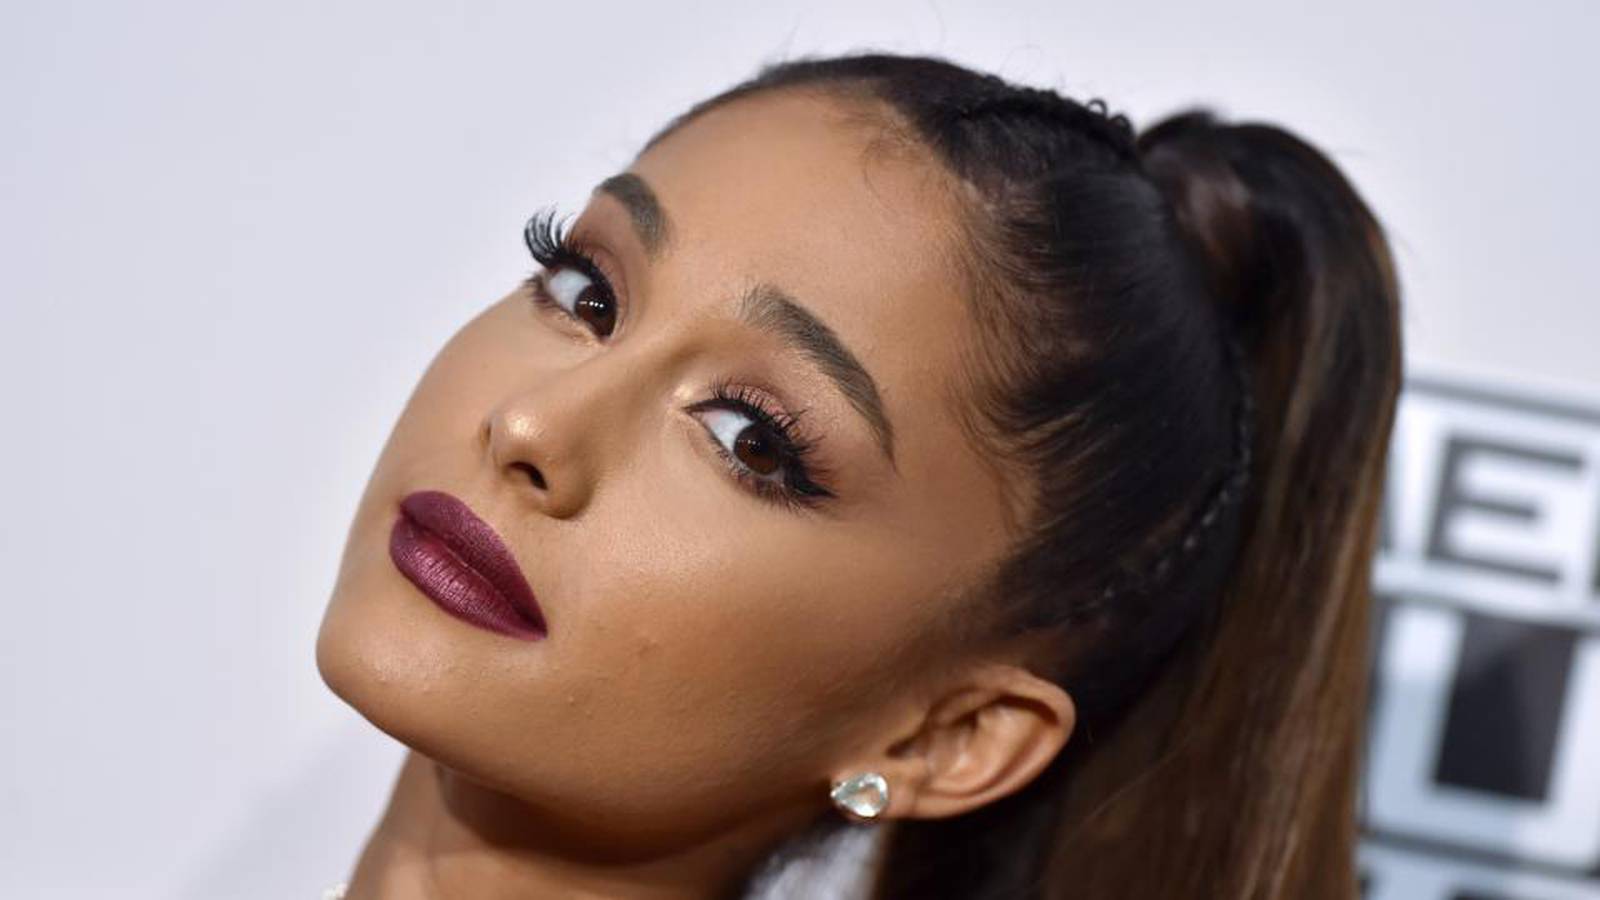 Ariana Grande mocked for her ‘barbecue grill’ tattoo – The Irish Times